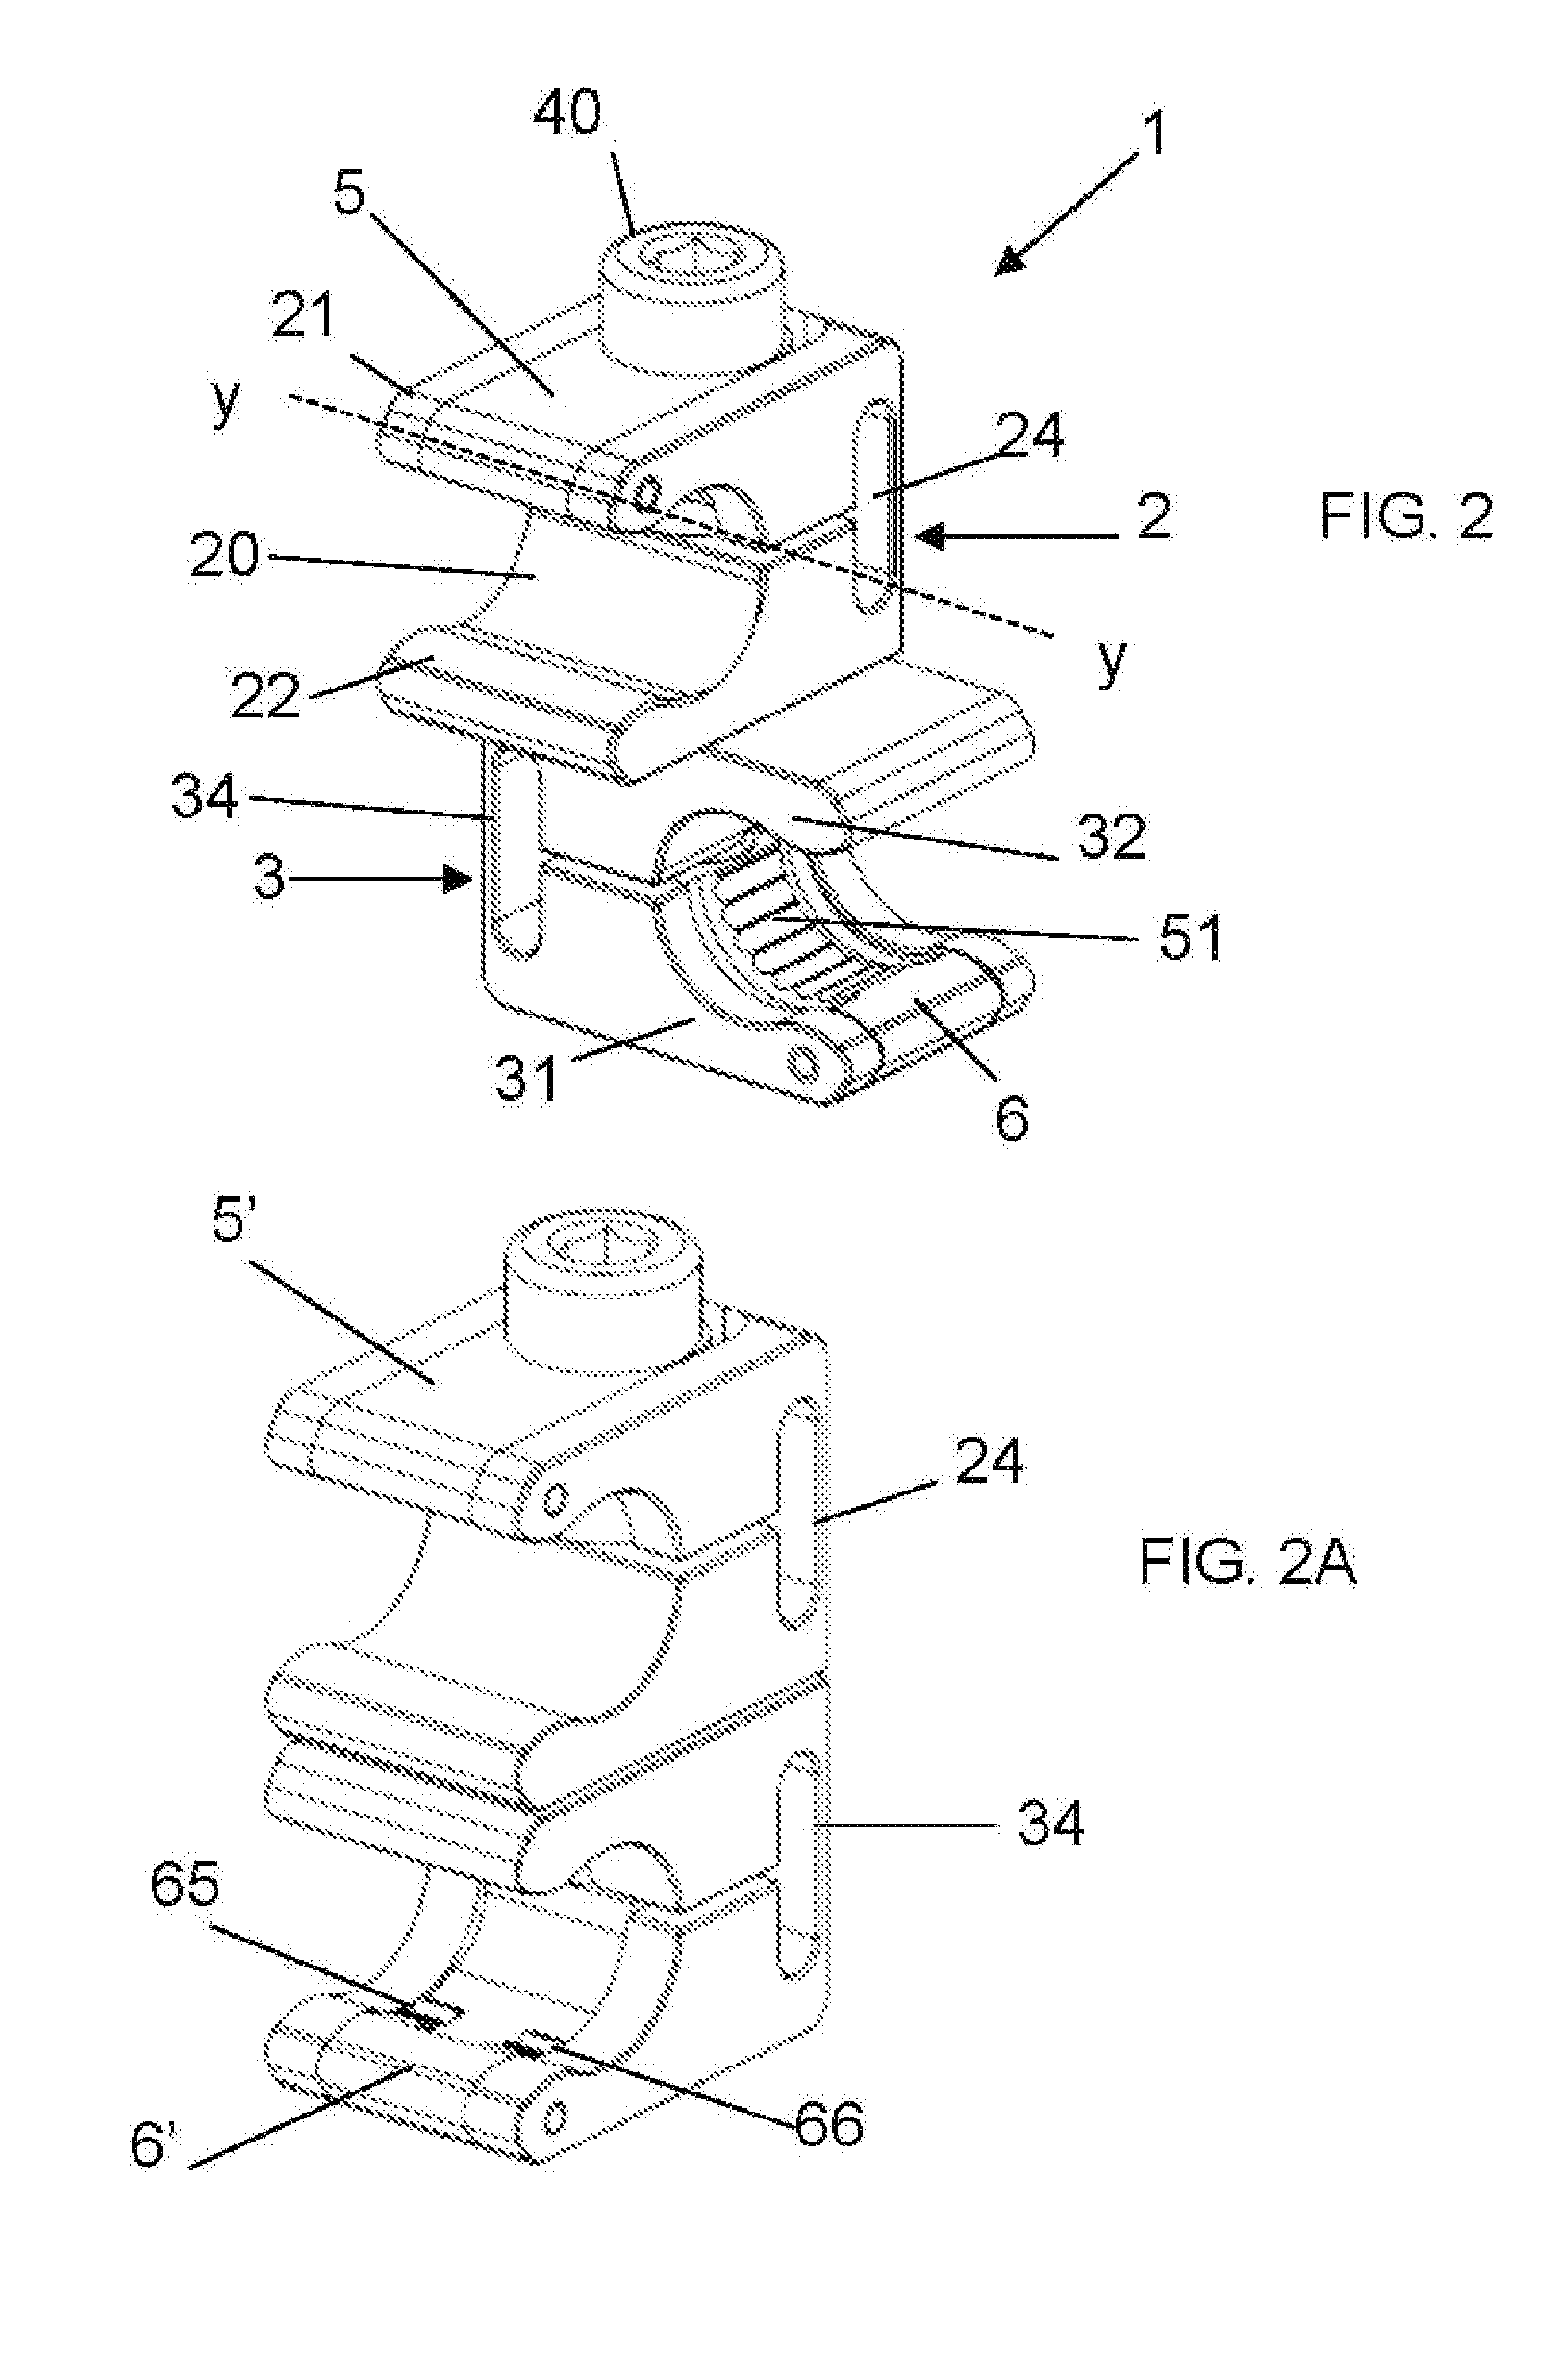 Clamp for External Orthopaedic Fixing Device